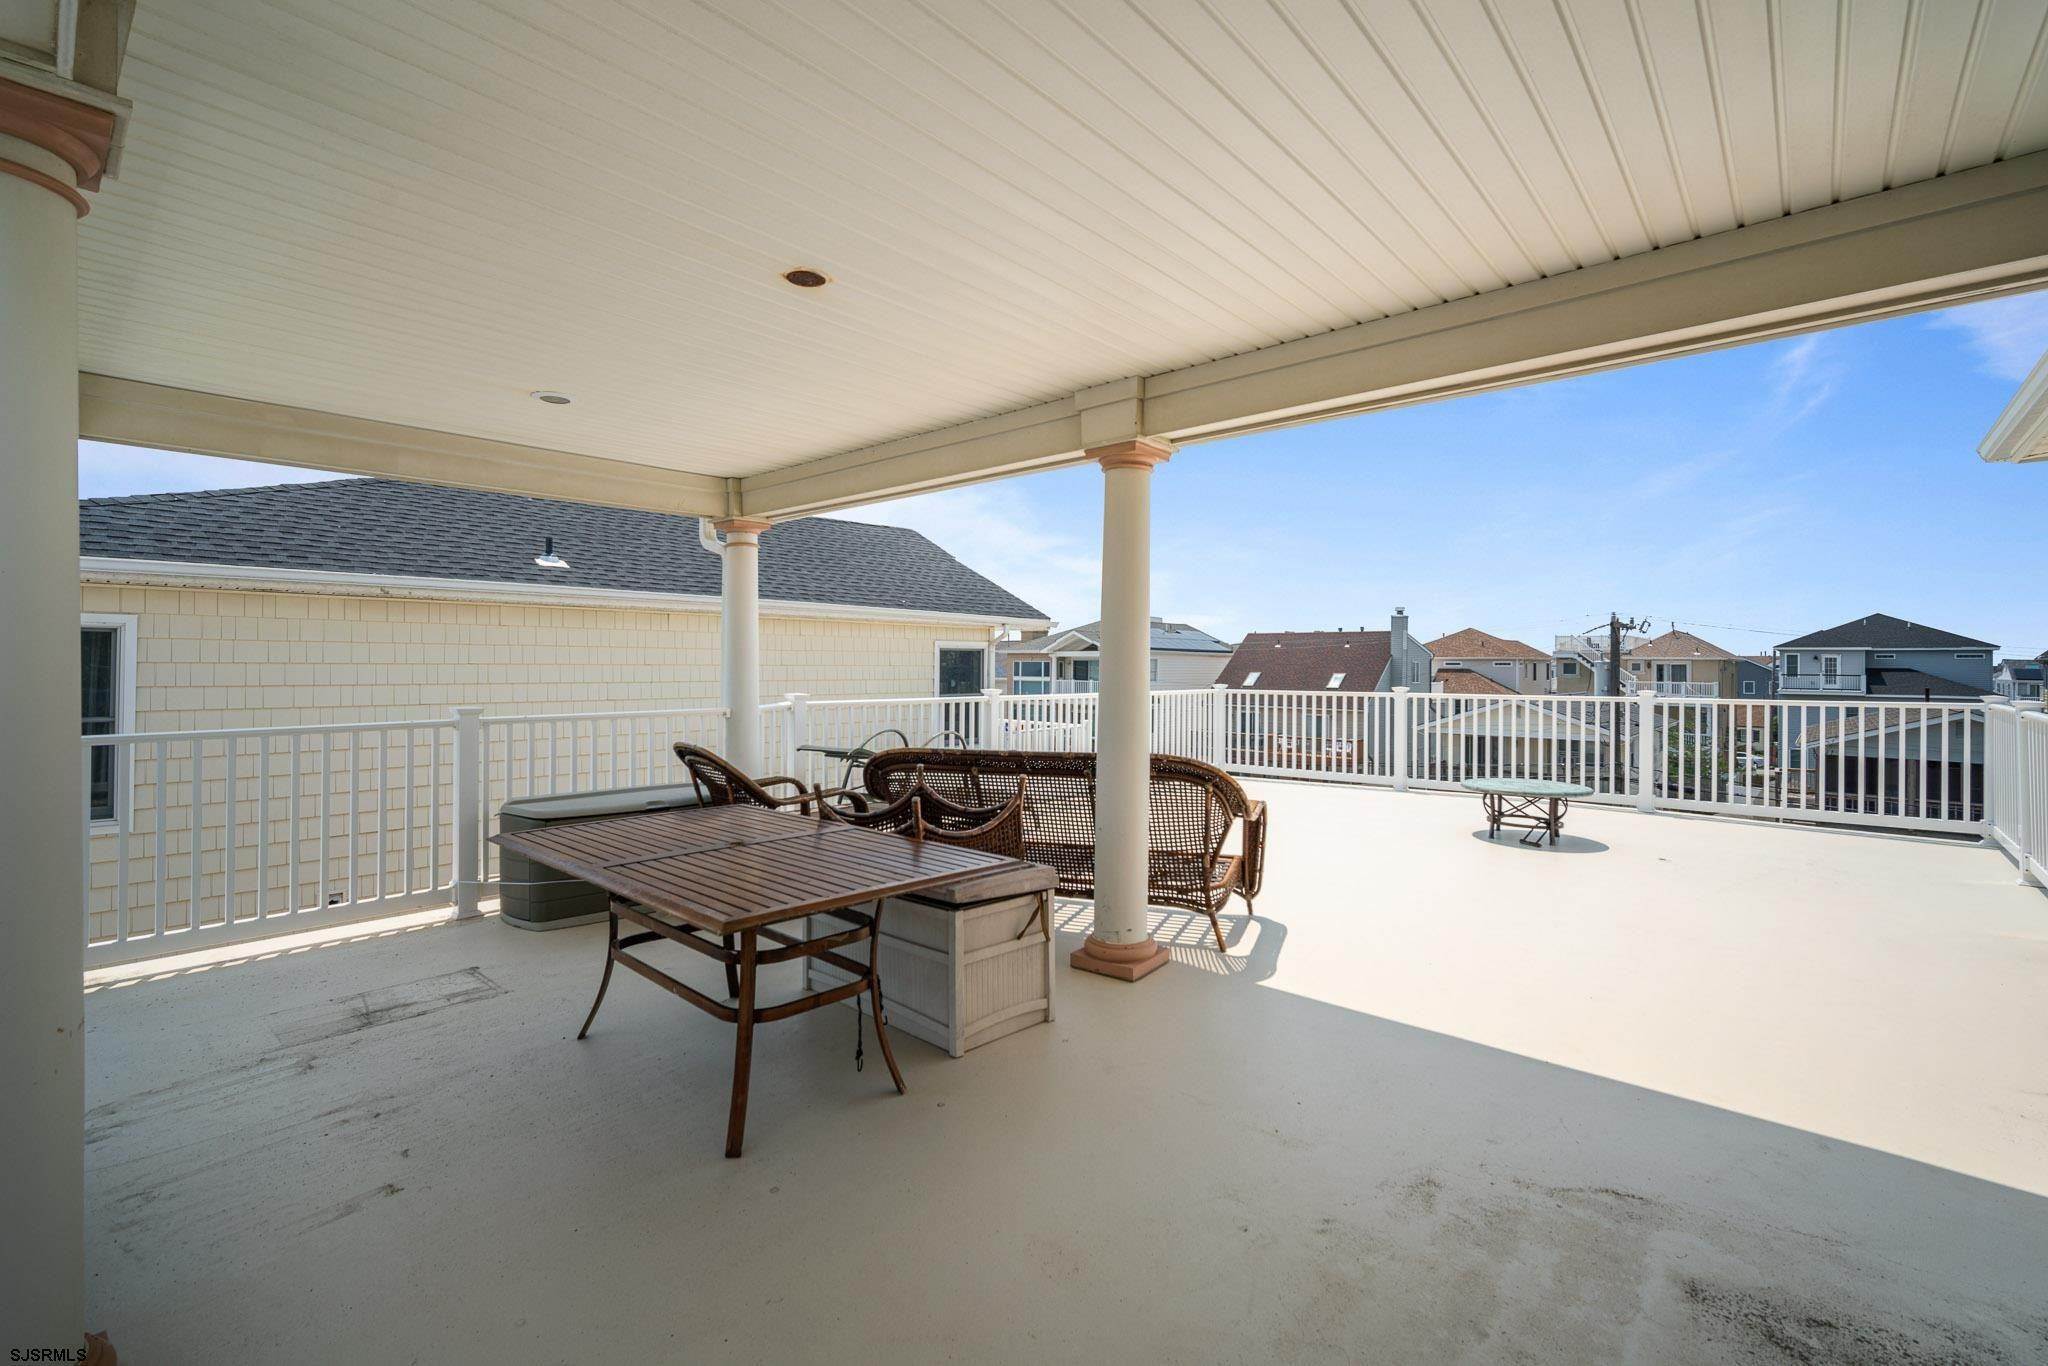 6. Condominiums for Sale at 235 14th Street Brigantine, New Jersey 08203 United States